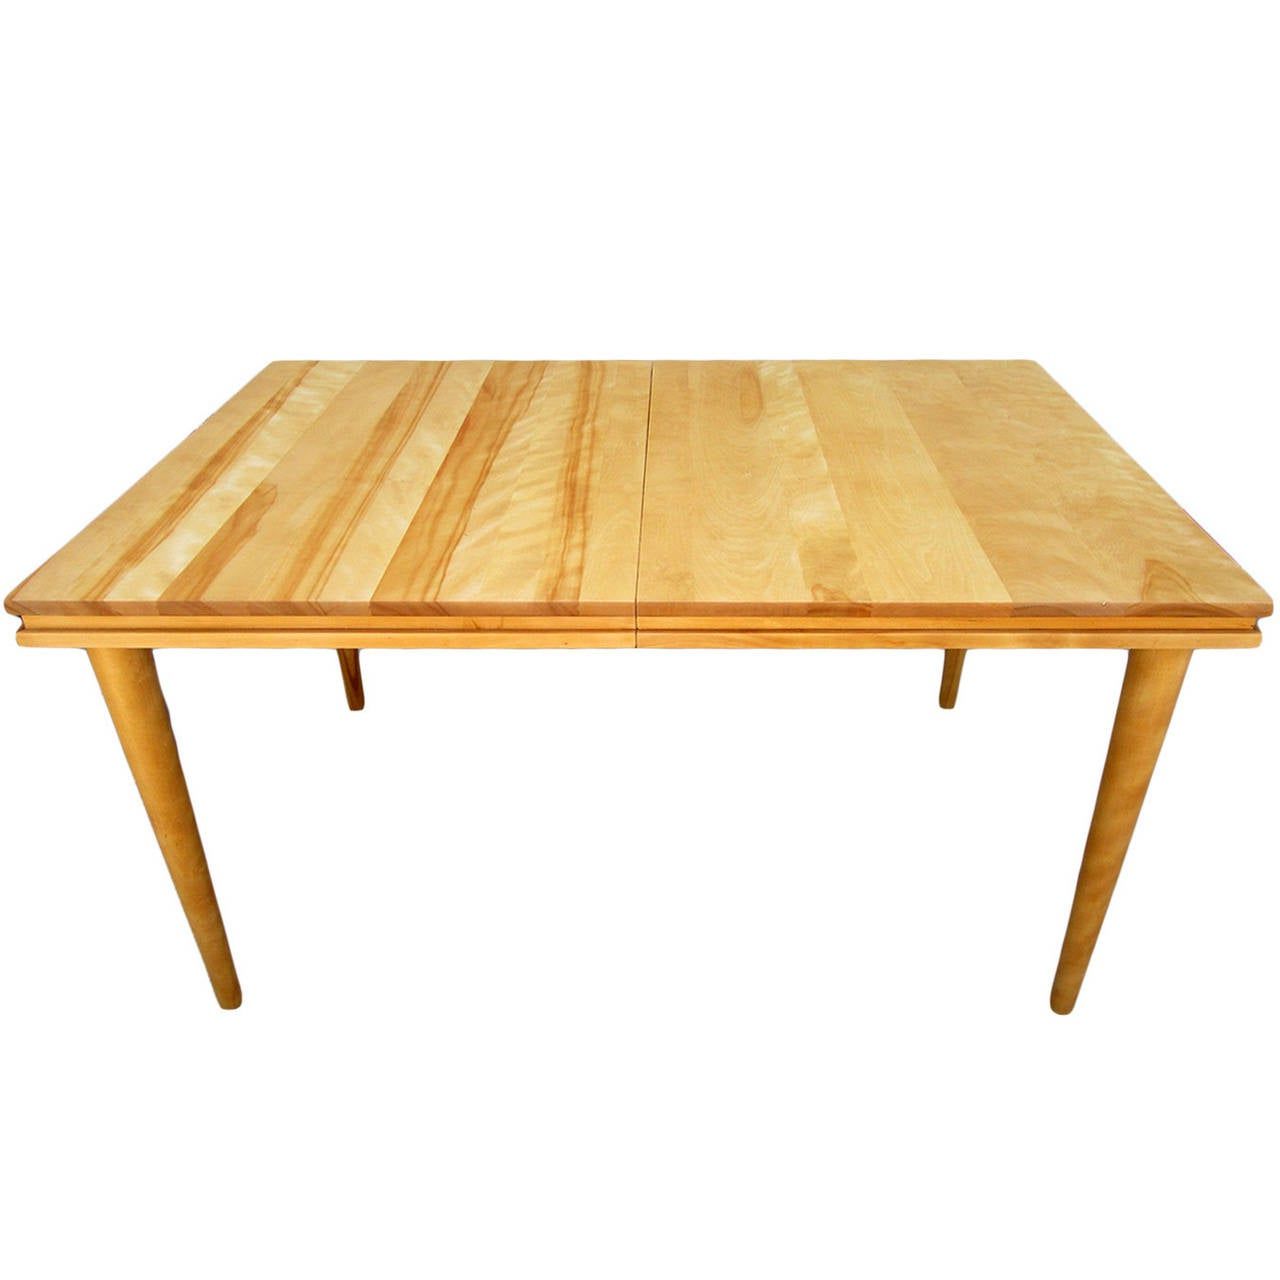 Tylor Maple Solid Wood Dining Tables With Regard To Most Up To Date Russel Wright Solid Maple Dining Table At 1stdibs (View 7 of 20)